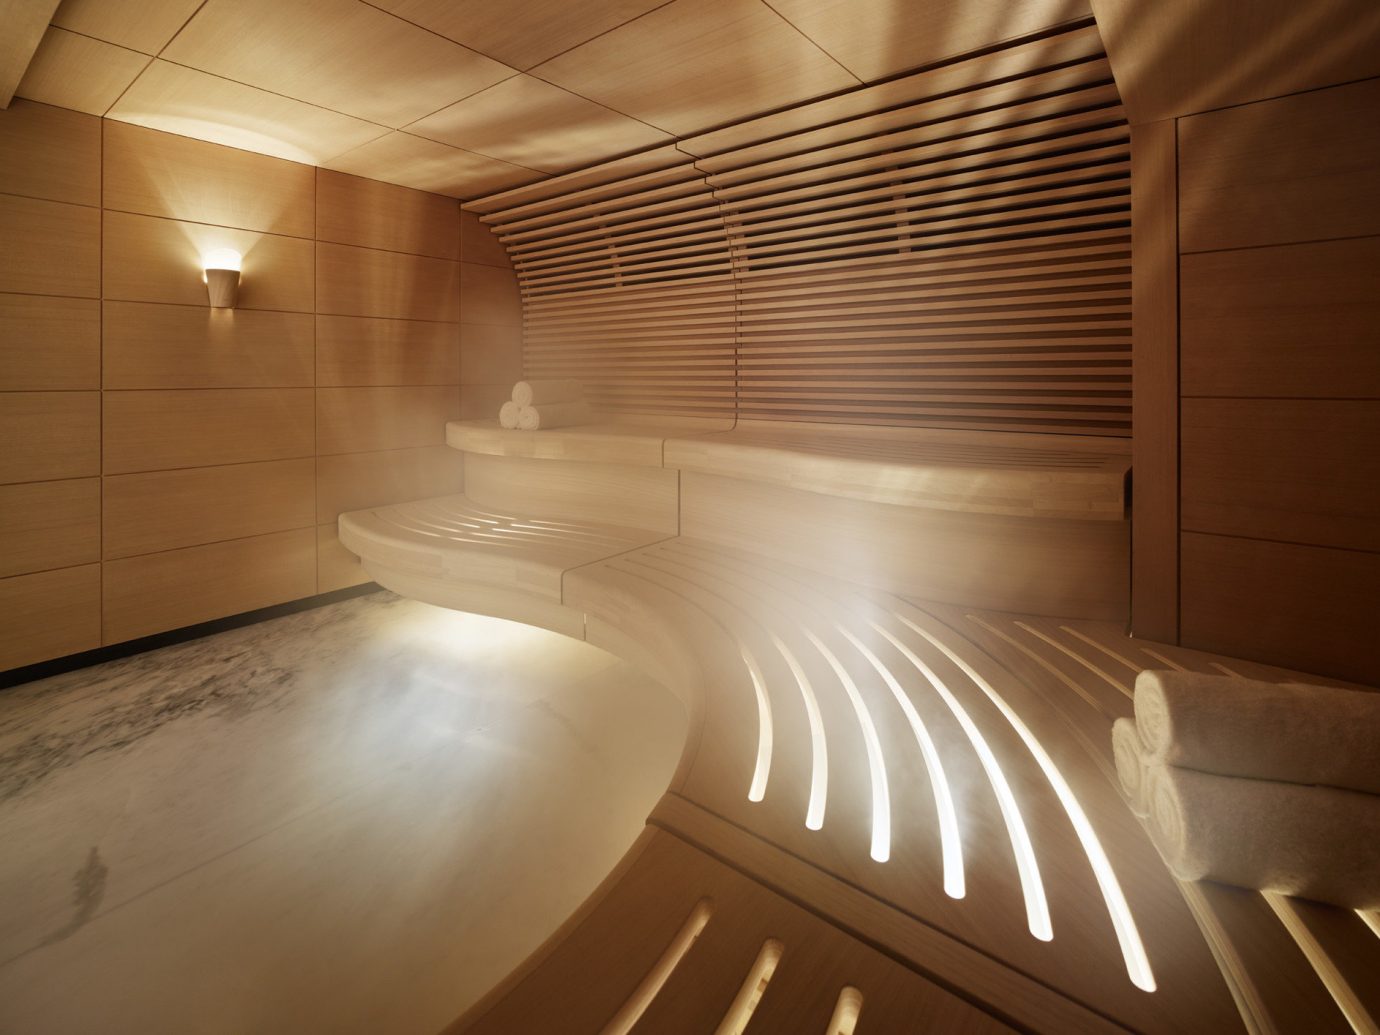 ambient lighting chic clean Health + Wellness Hotels Luxury marble private relaxation sauna Spa Spa Retreats steam room warm indoor ceiling room light floor swimming pool interior design lighting auditorium